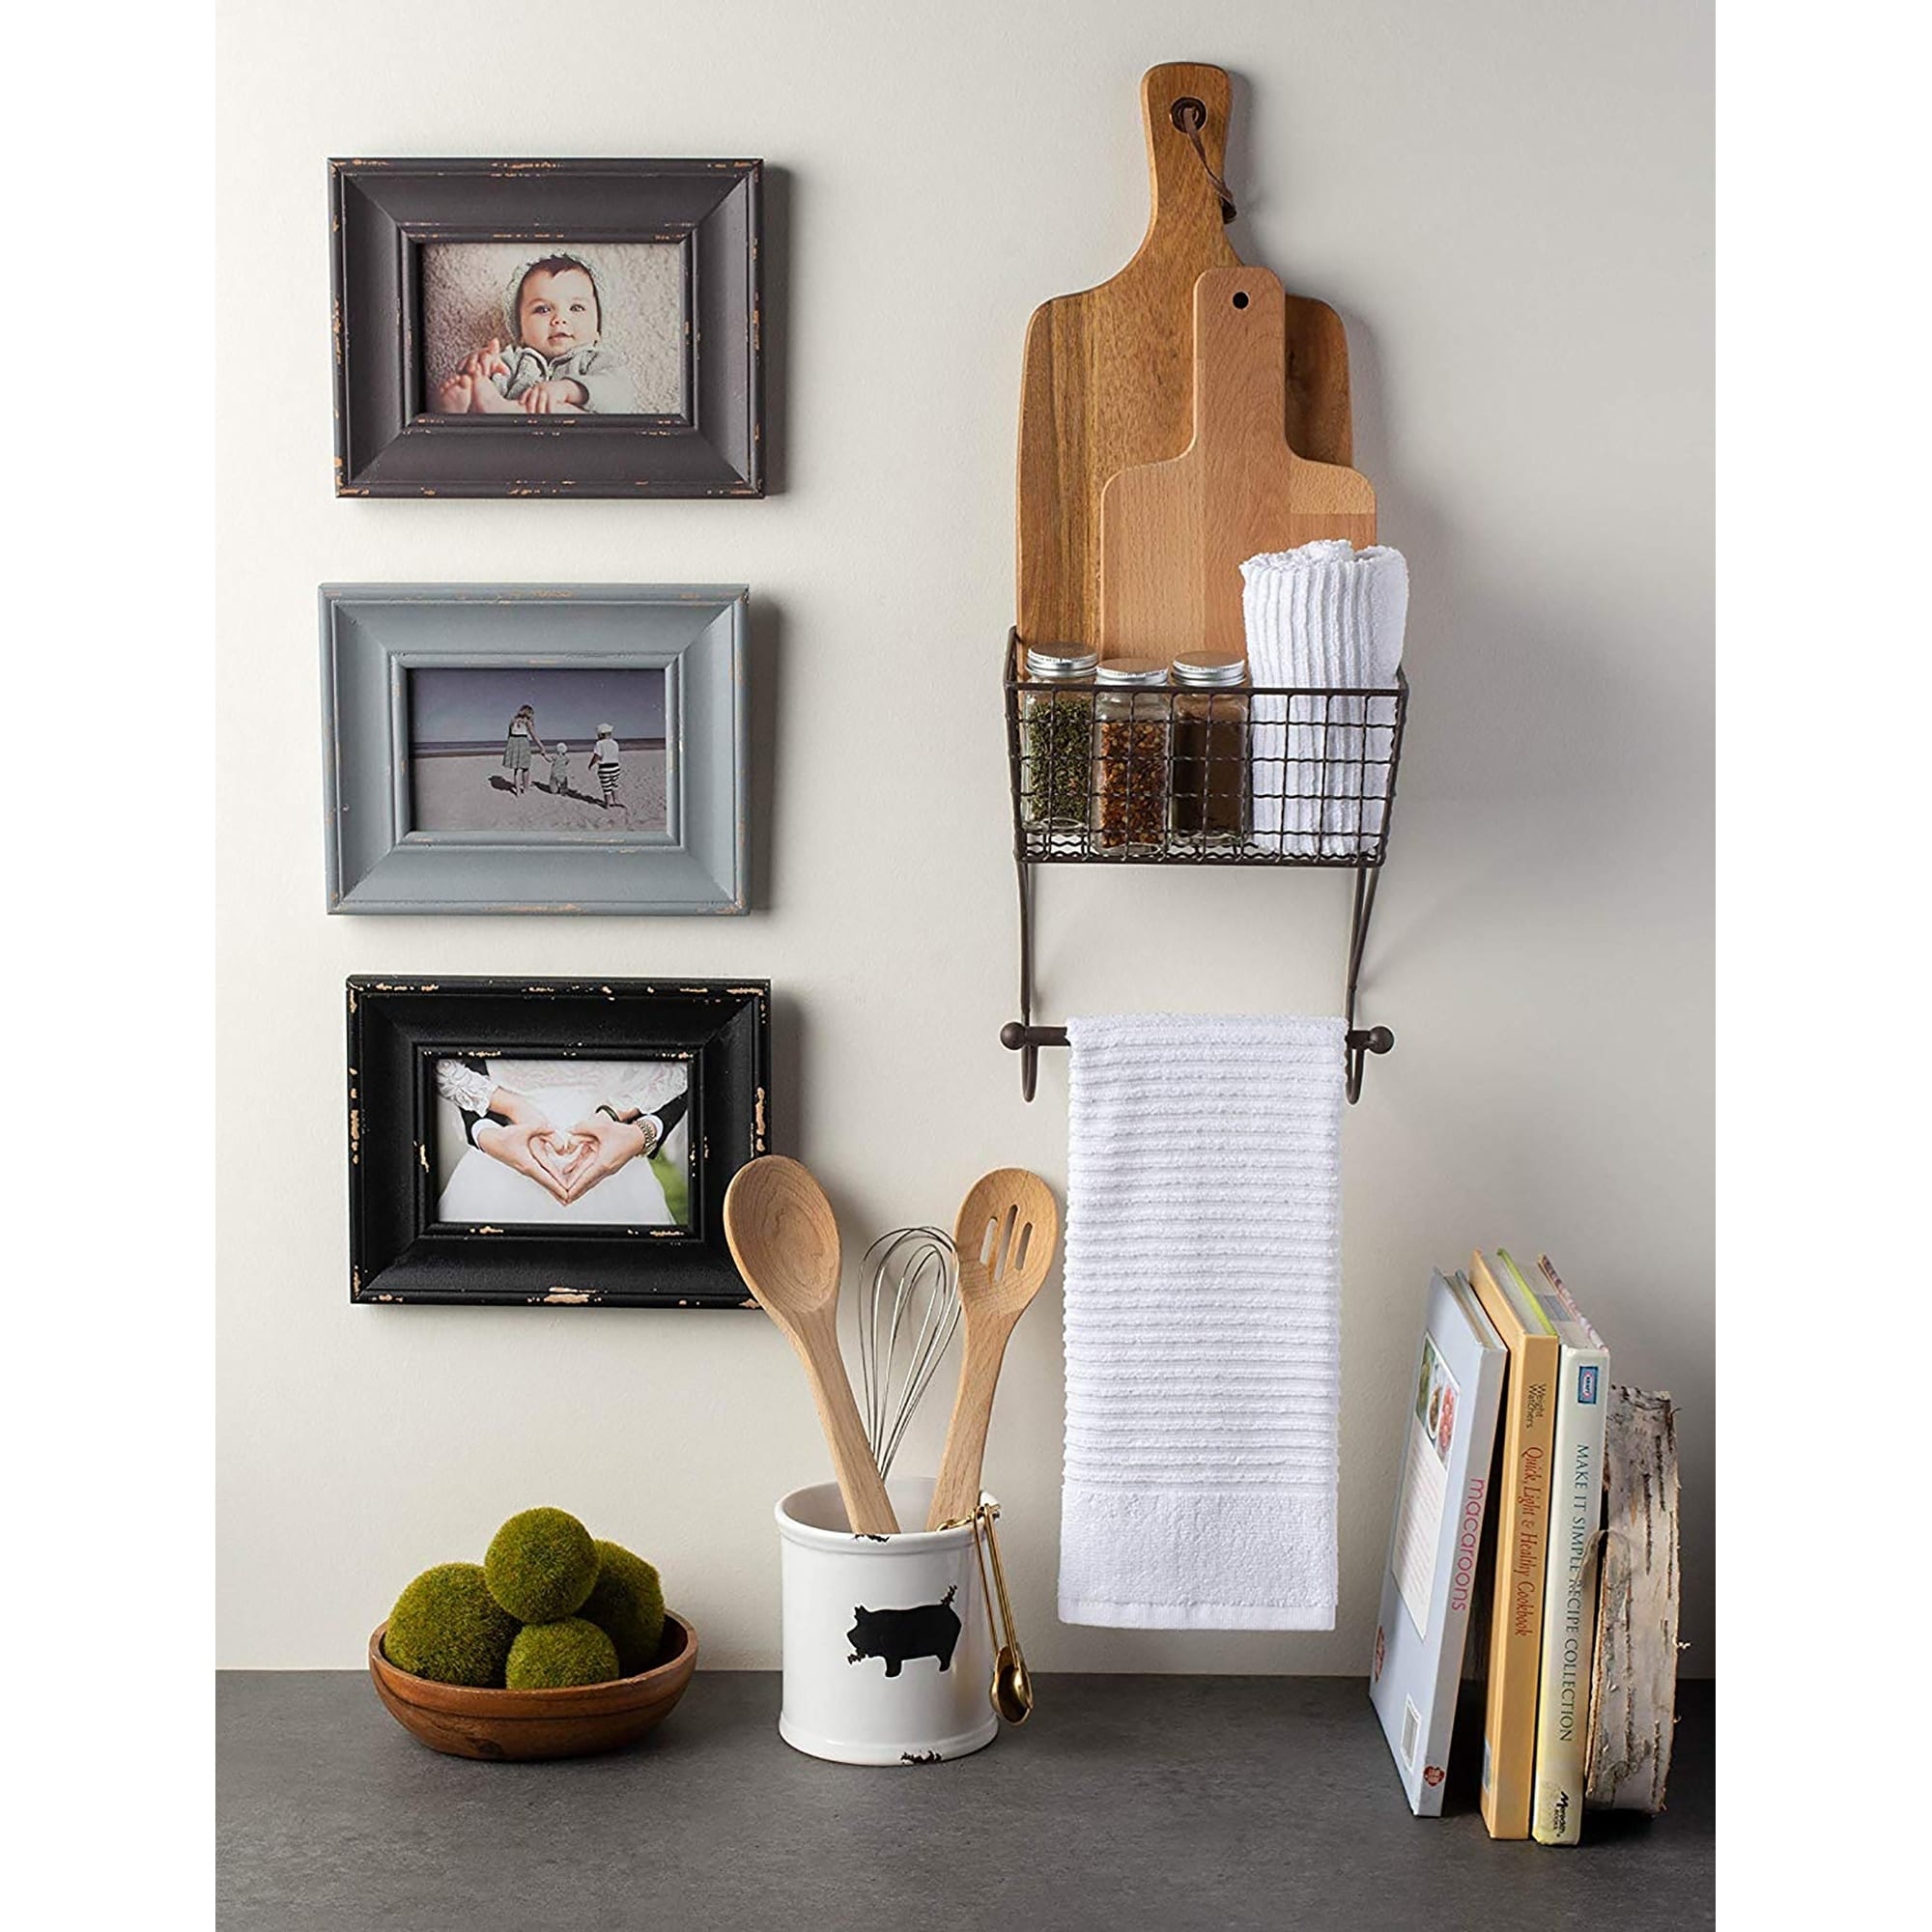 https://ak1.ostkcdn.com/images/products/28458827/DII-Farmhouse-Towel-Rack-Large-Grey-577930a8-0f9a-4aa8-8b0a-071e6b4538aa.jpg